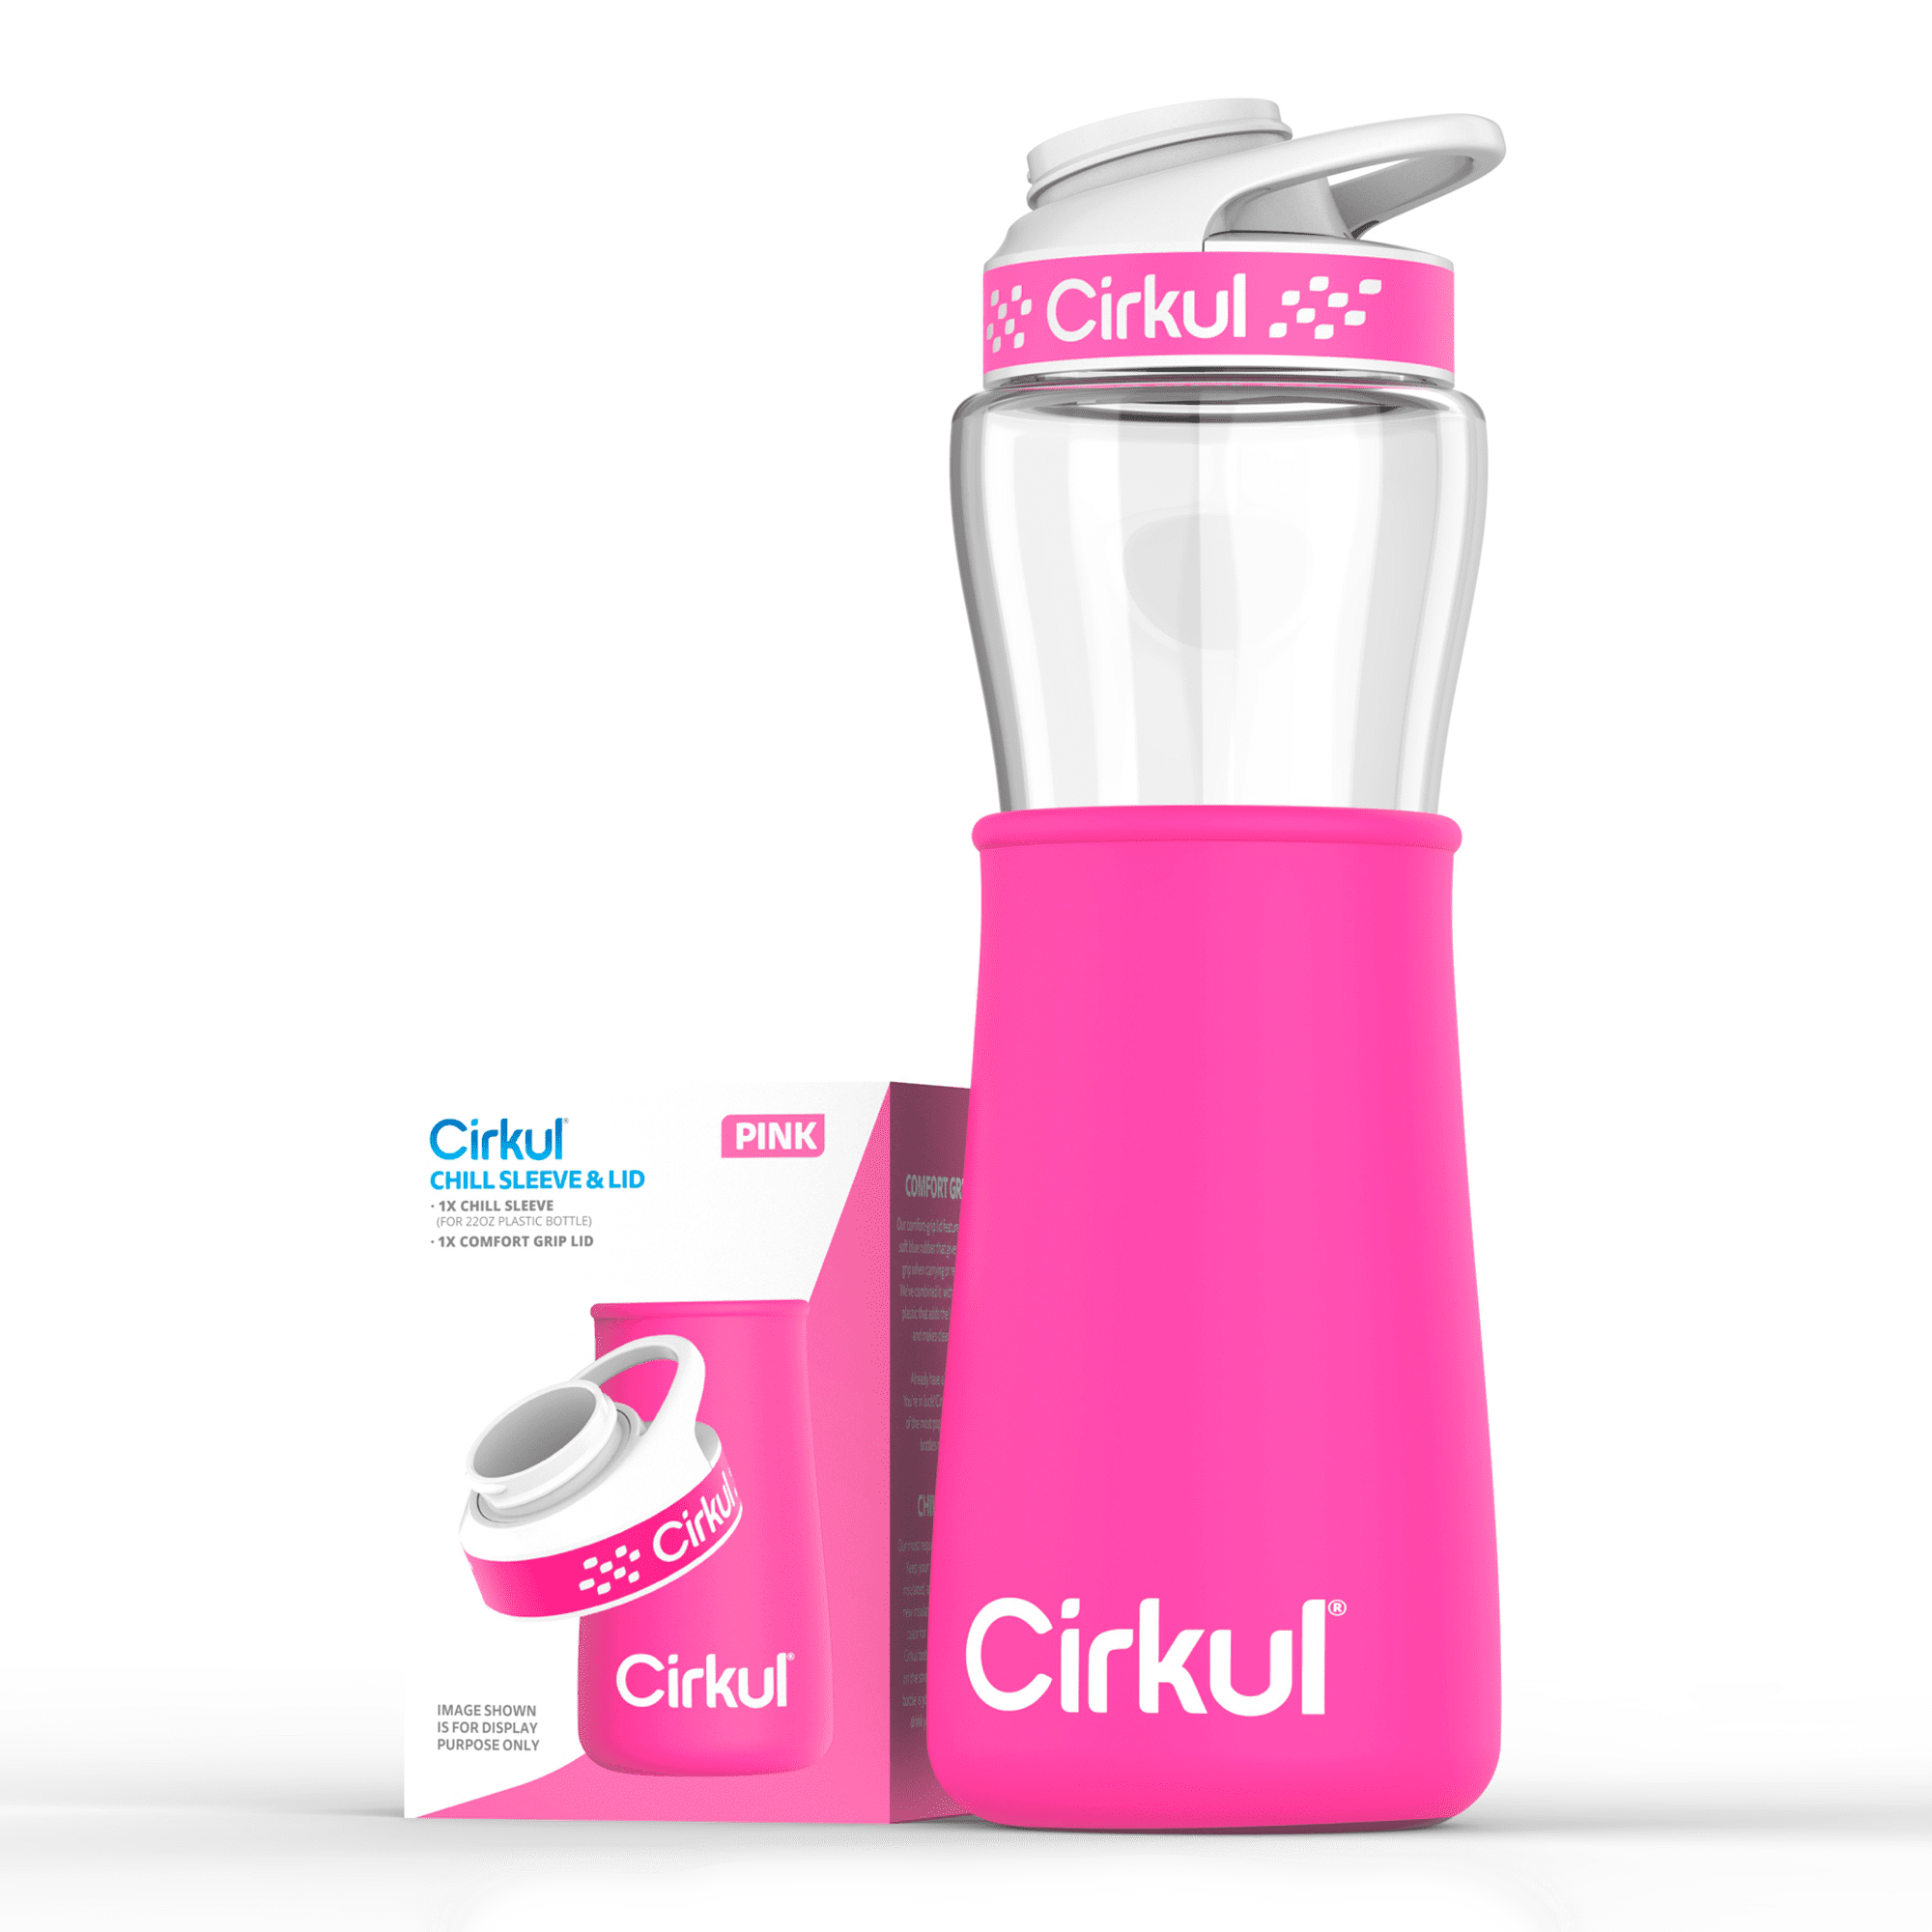 Cirkul - Send them back to school in style with a customized